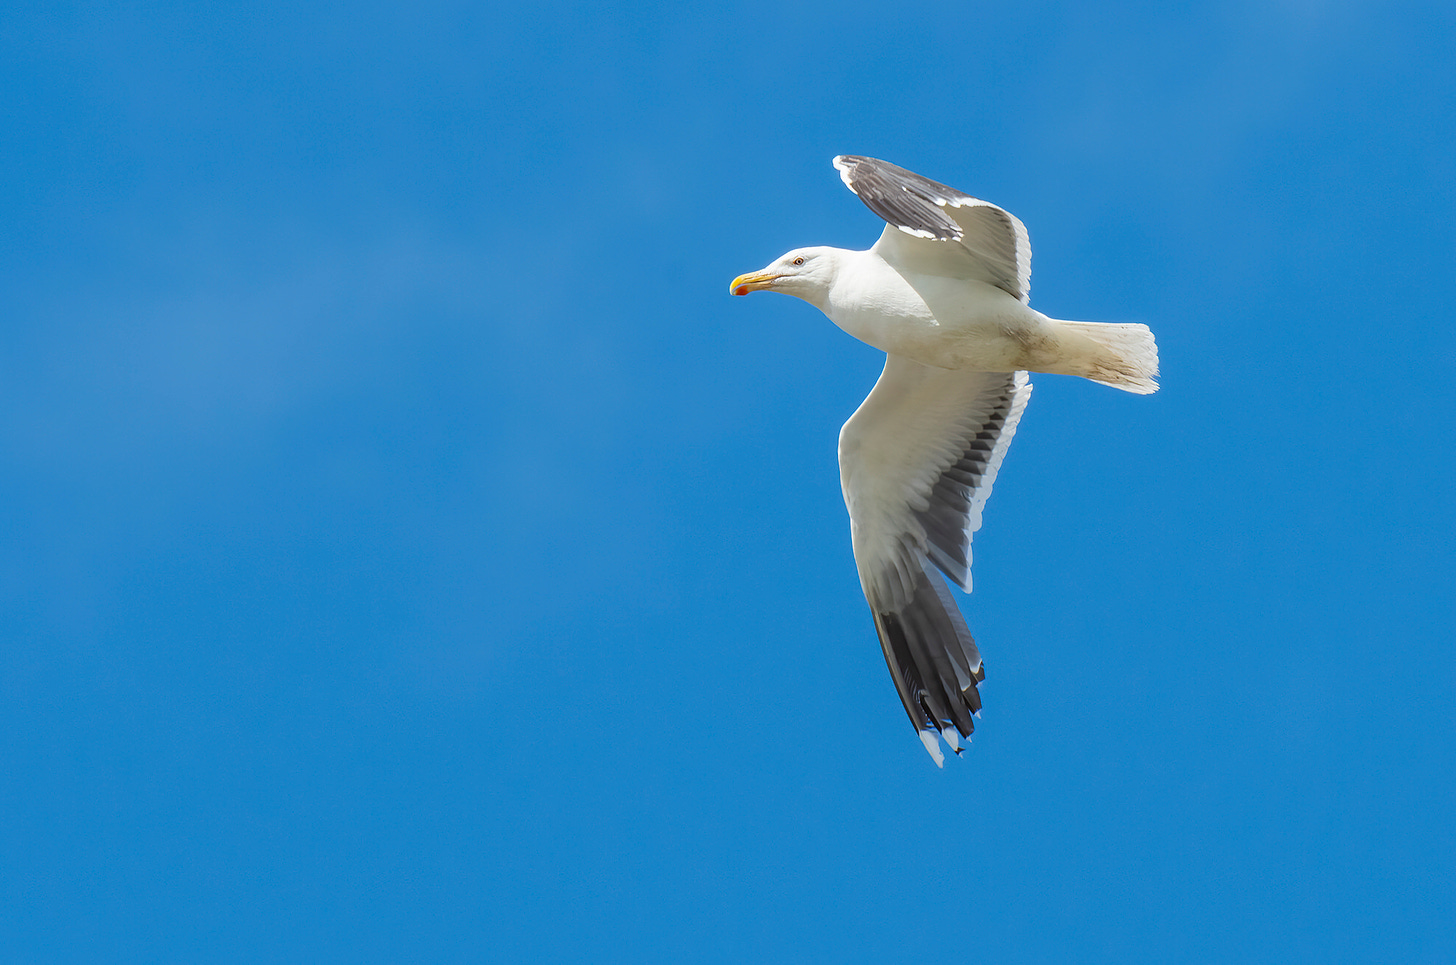 Photo of a great black-backed gull in flight against a bright blue sky